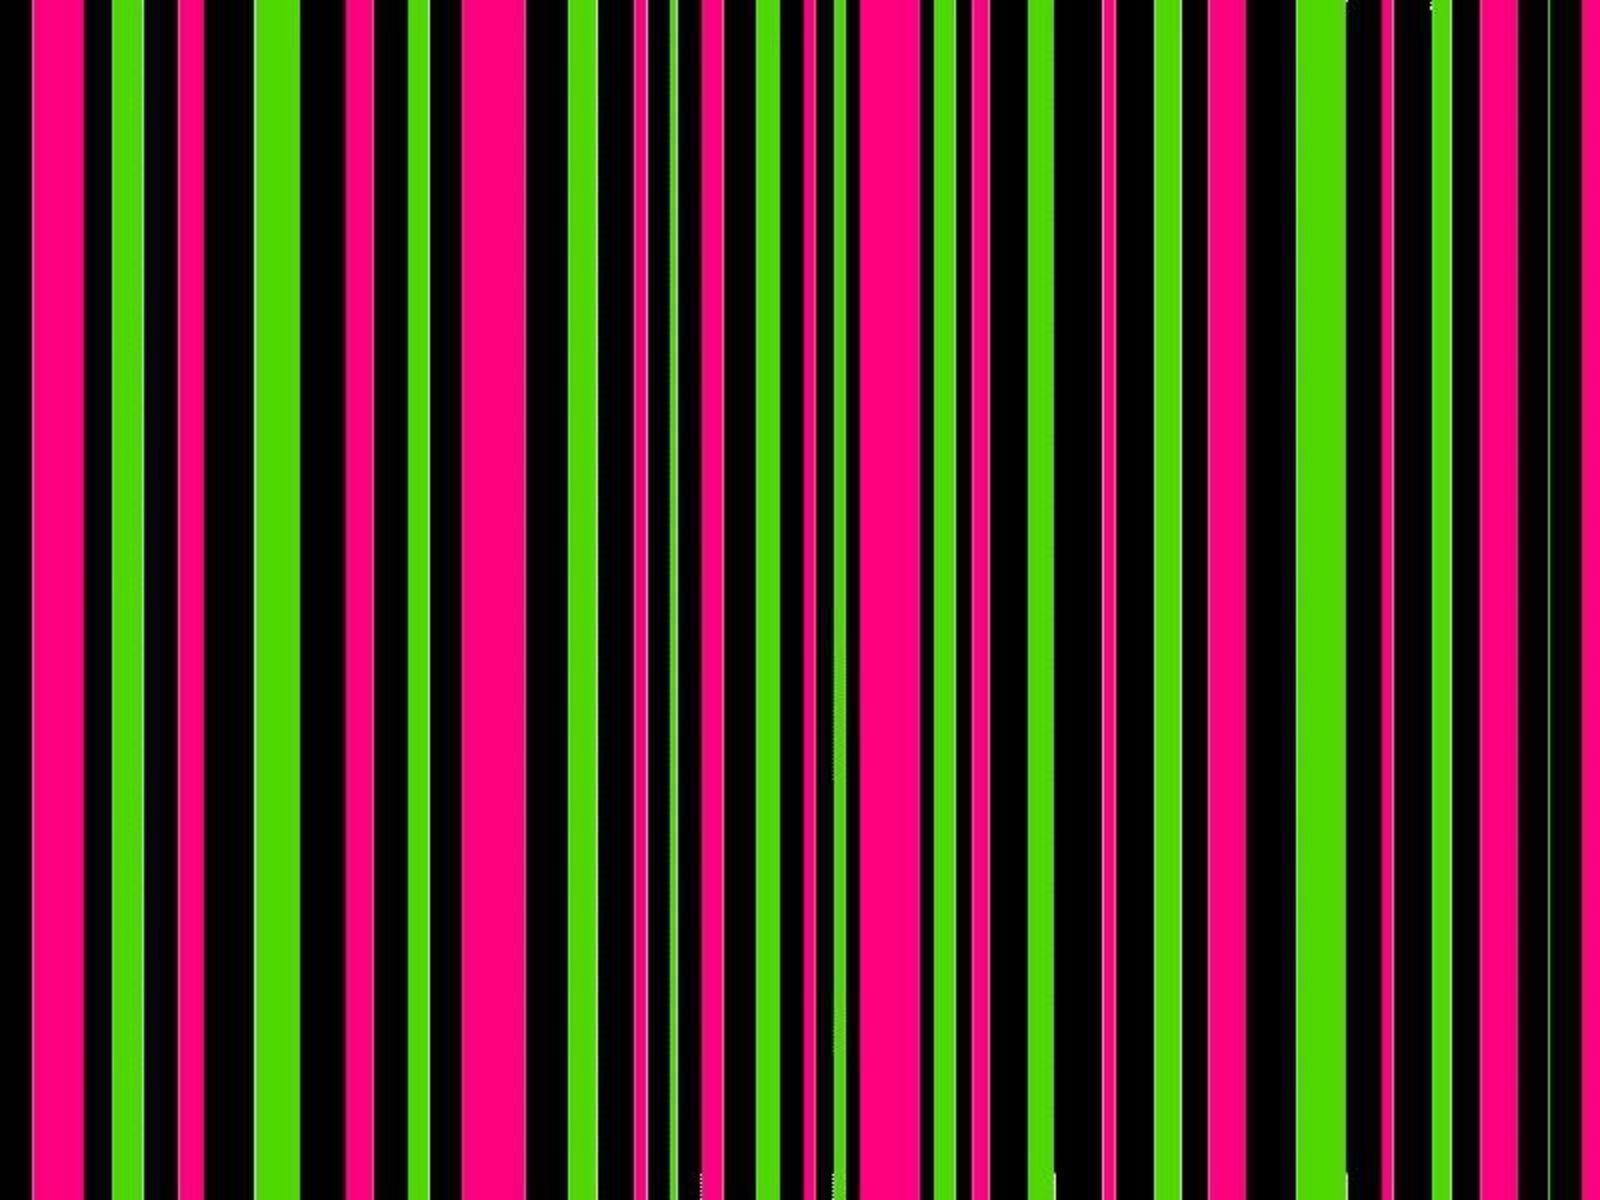 Neon Colors Rock image Stripes HD wallpaper and background photo